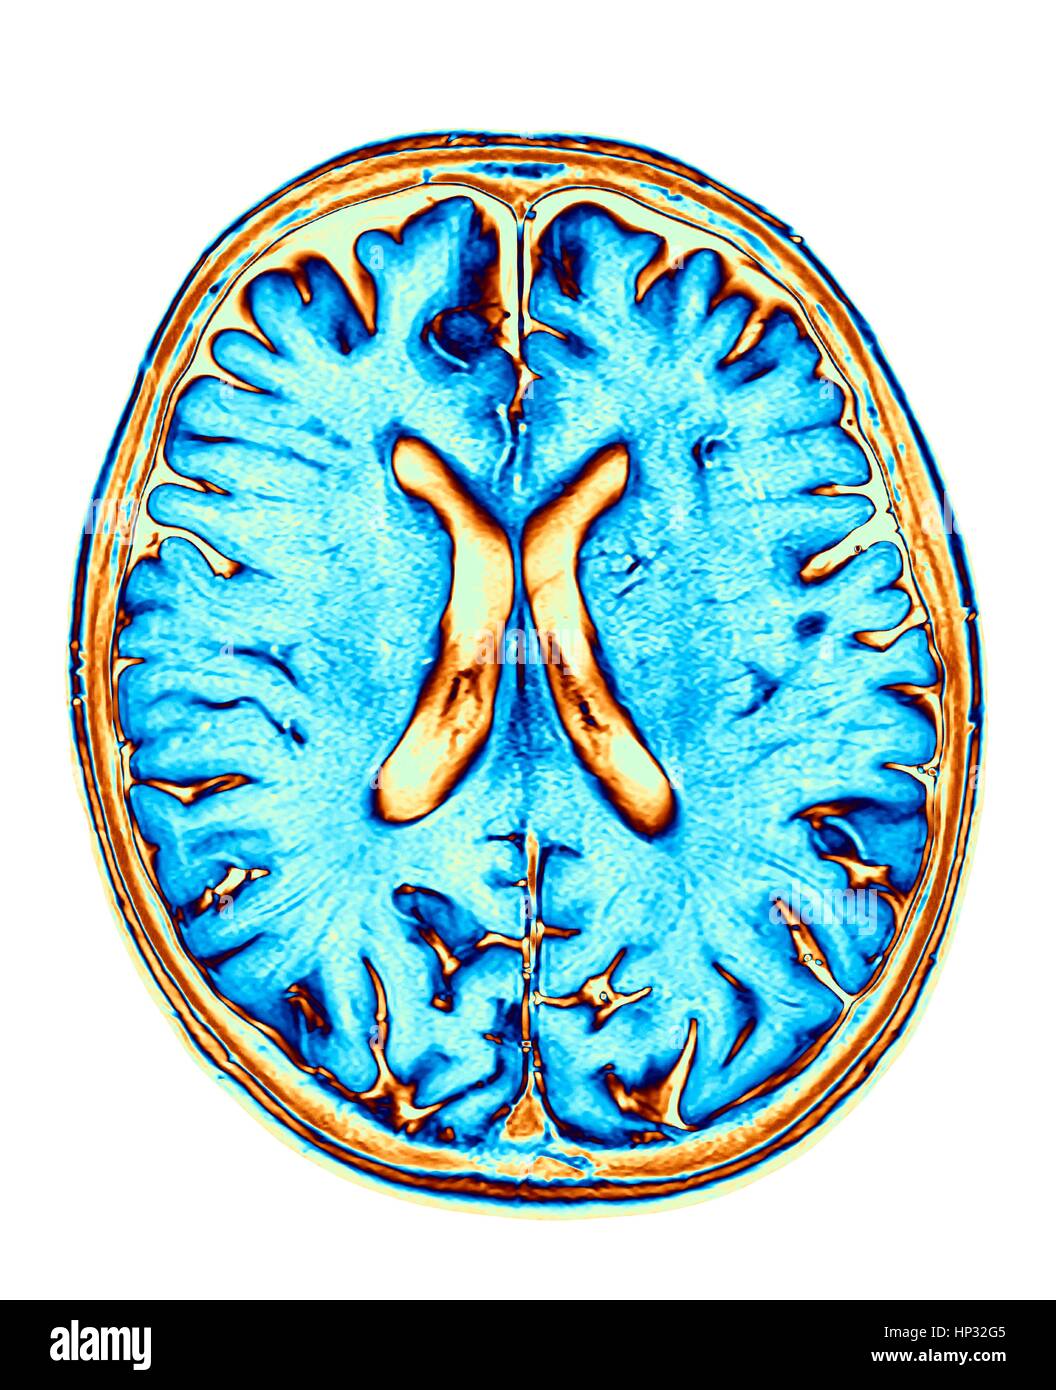 Normal brain. Coloured magnetic resonance imaging (MRI) scan of an axial section through a healthy brain, The images shows the cortex and lateral ventricle (X-shaped in the middle). Stock Photo